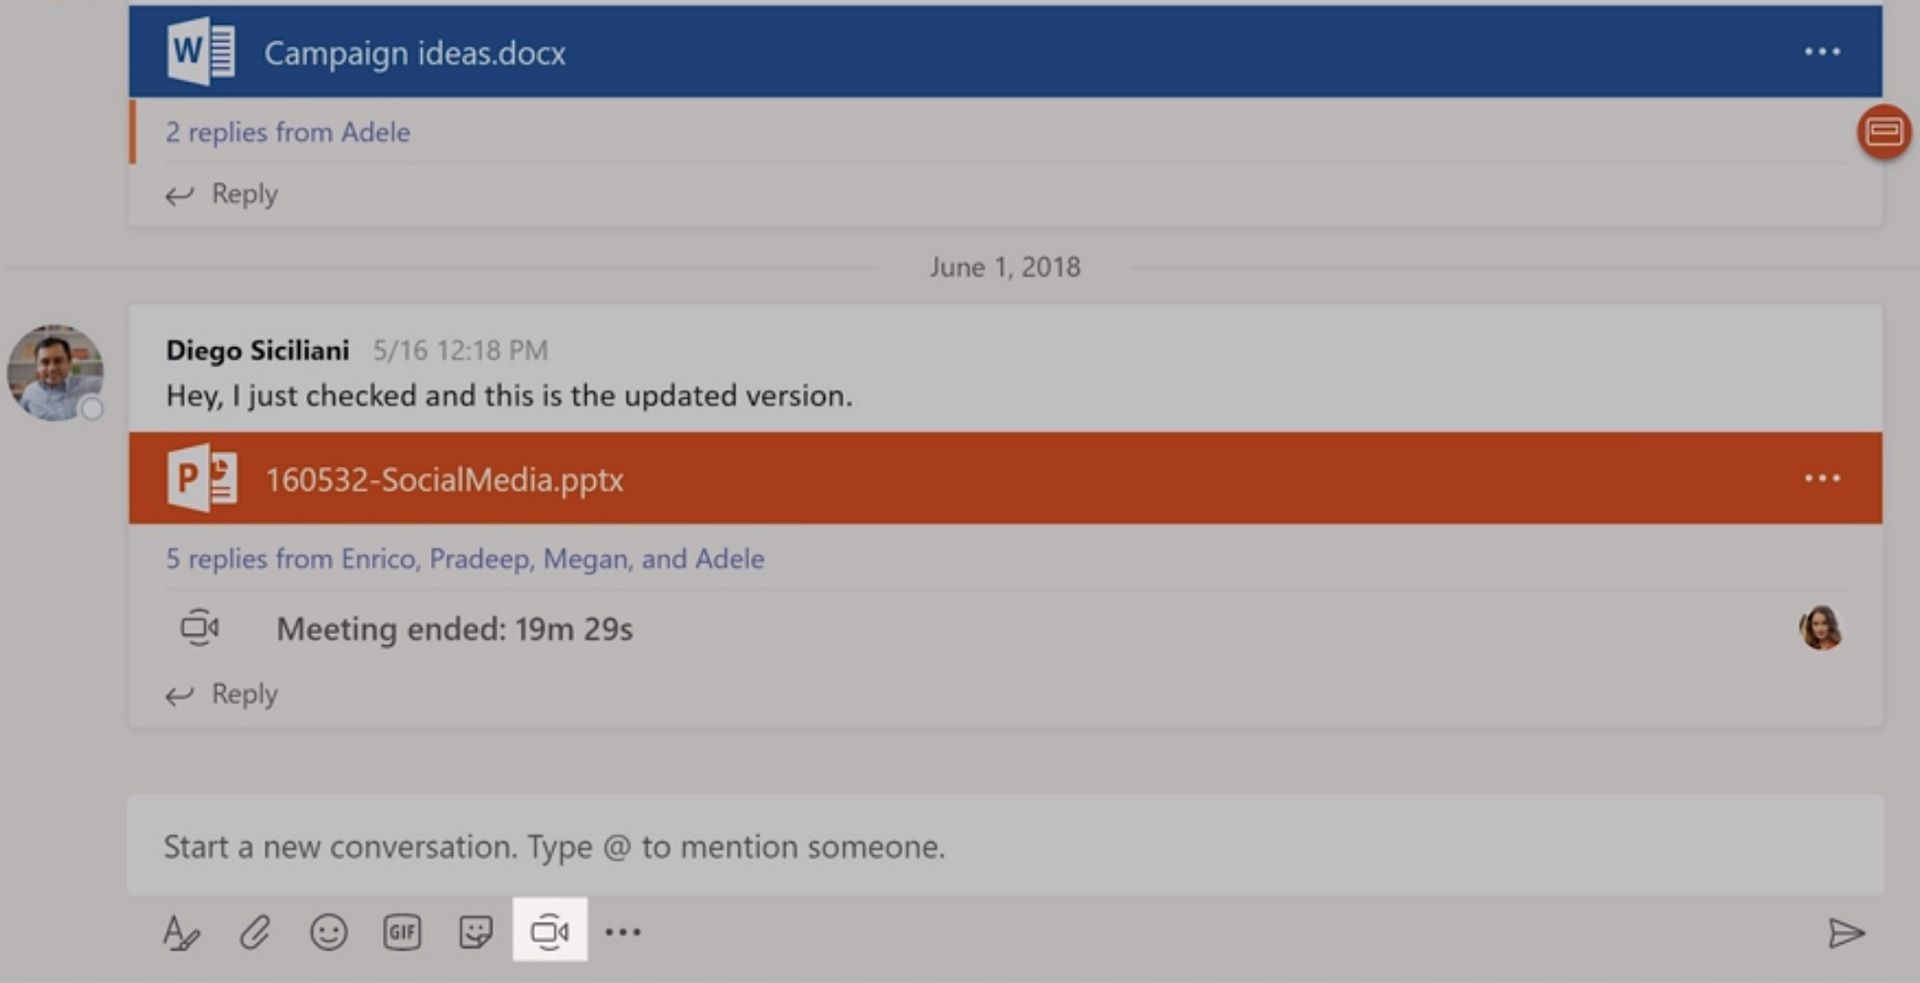 What Is Microsoft Teams The Slack Like App For Office 365 Explained image 1